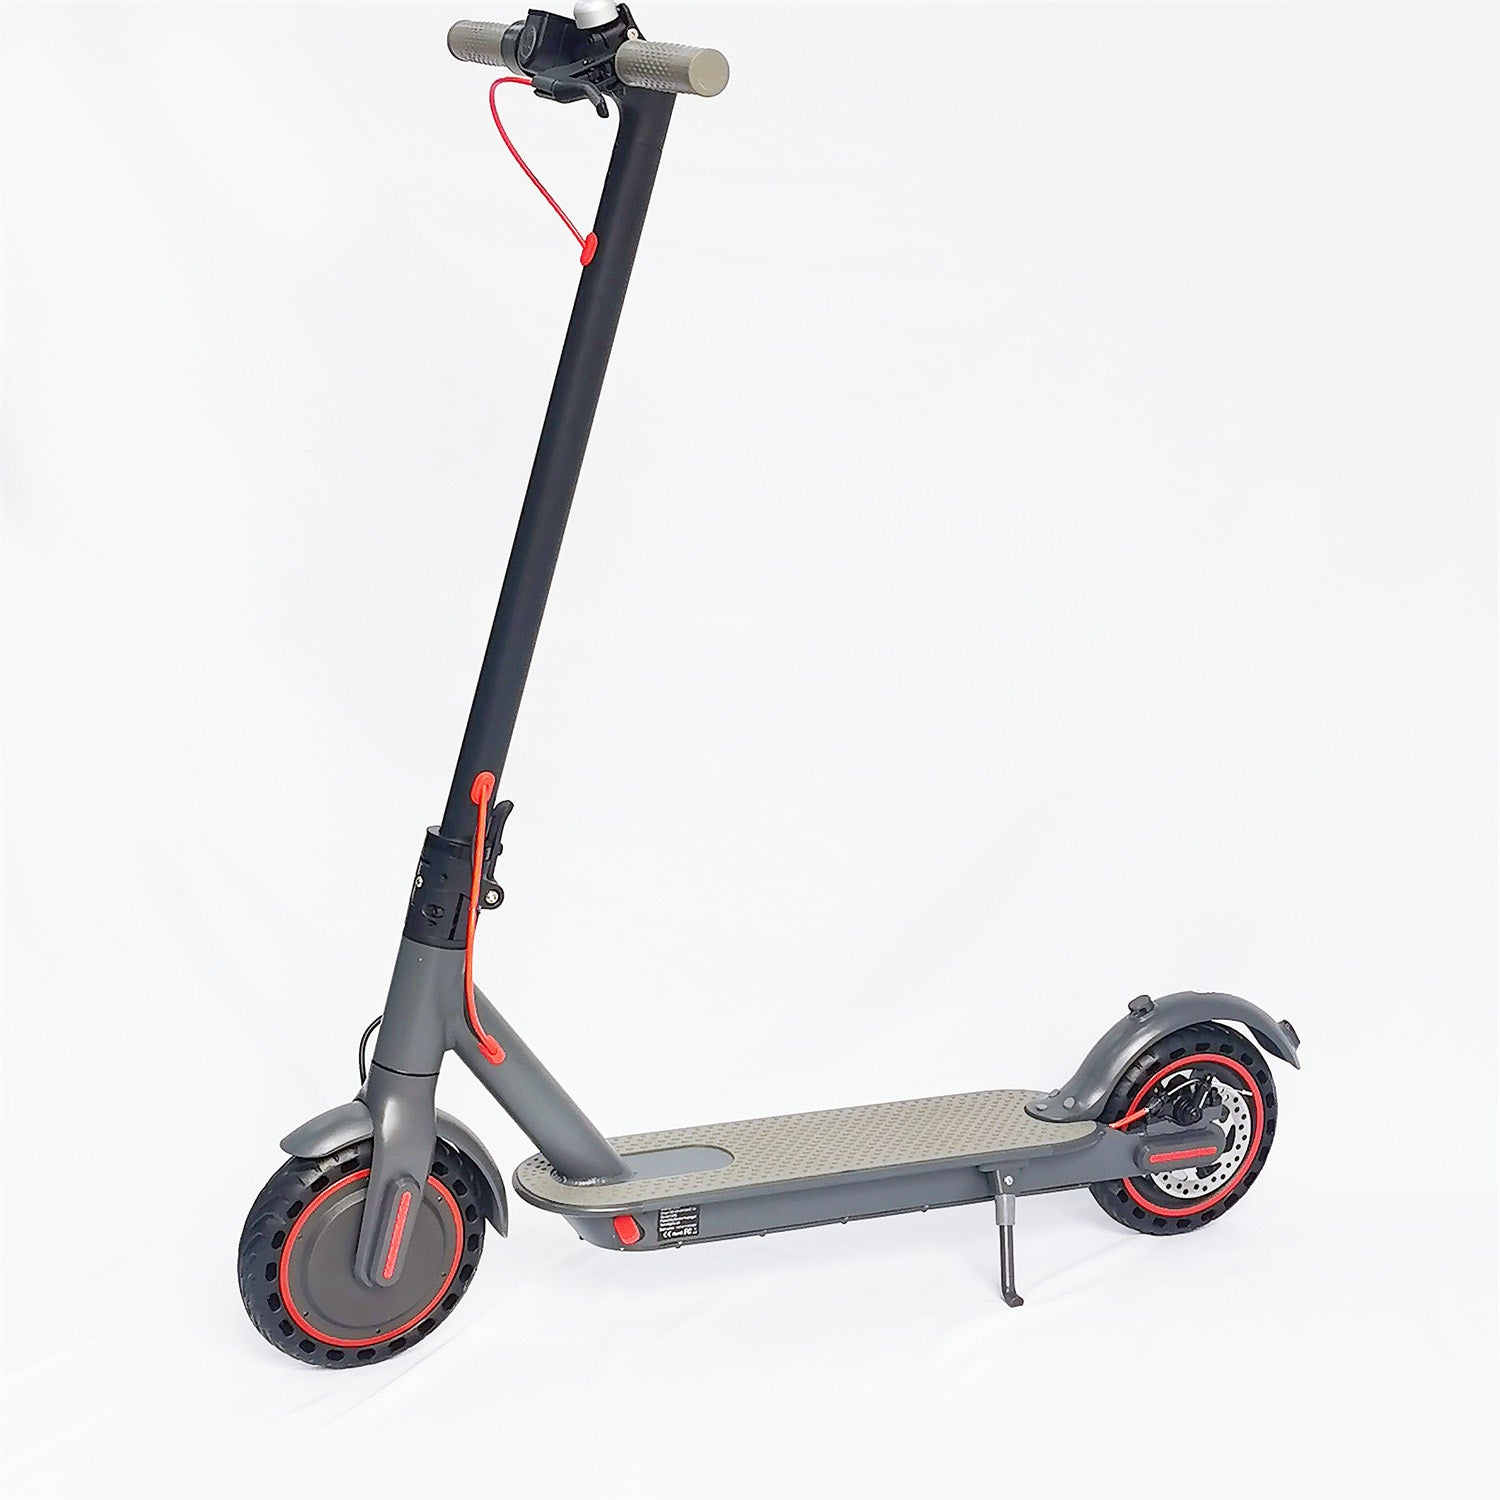 EU Stock HT-T4 Pro 36v 350w 10.4ah 8.5inch 25-30kmh Adult Electric Scooter with APP